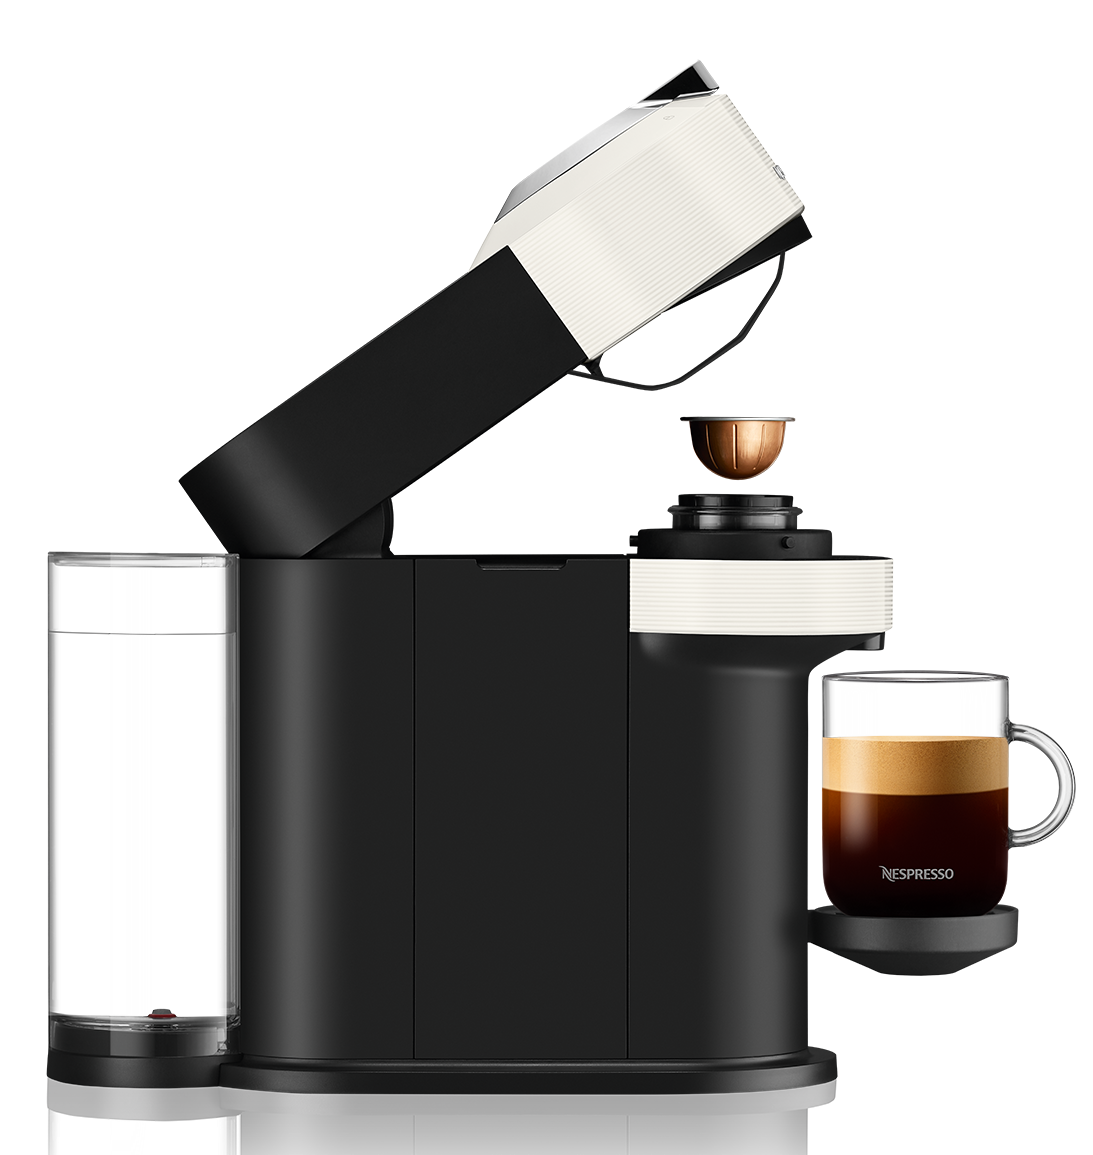 Nespresso Vertuo Next review: 5 things to know